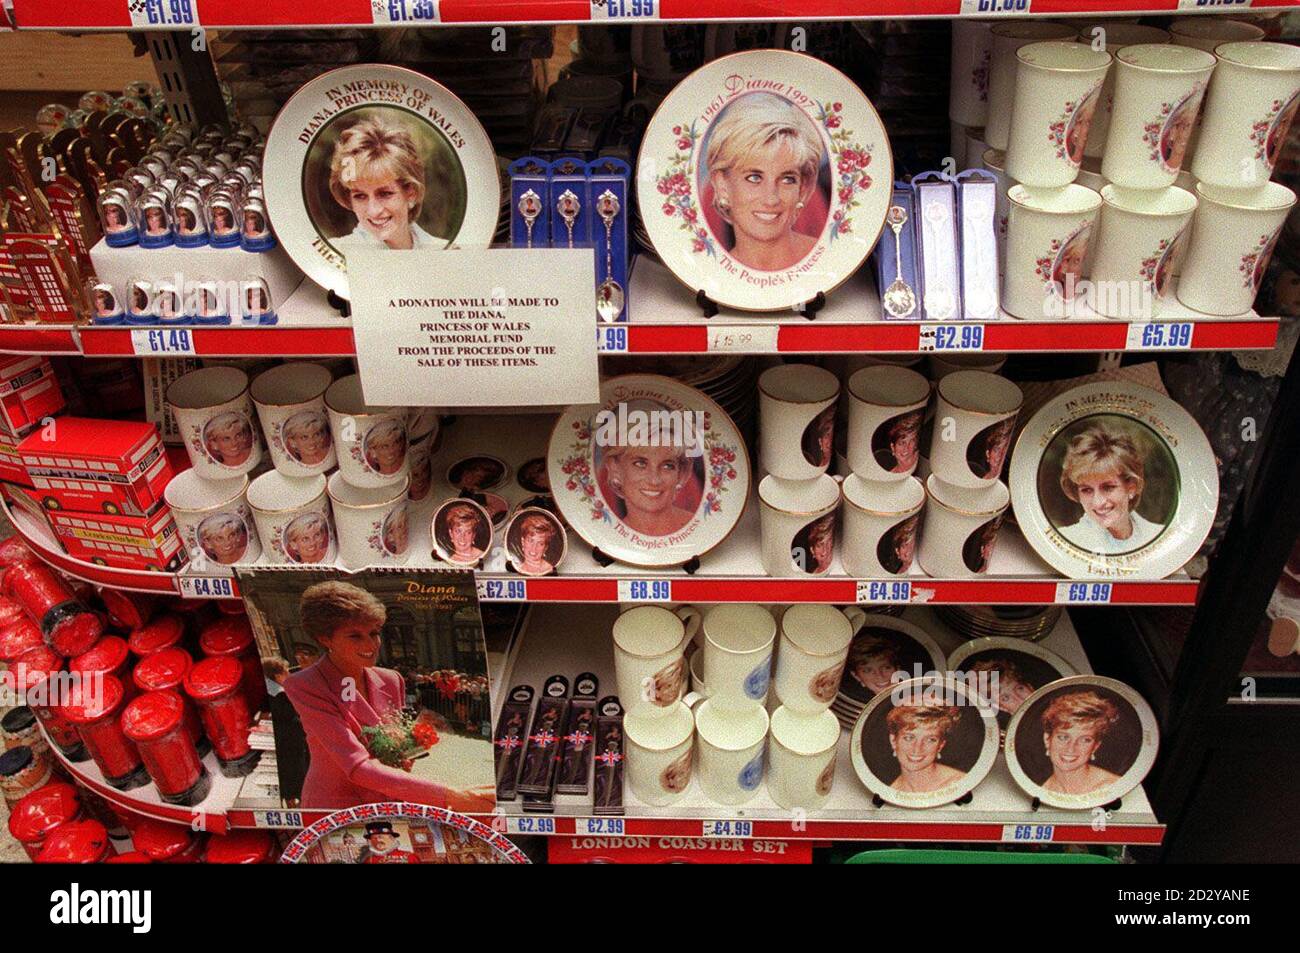 PA NEWS PHOTO 5/12/97  MEMORABILIA AND SOUVENIRS DEPICTING THE IMAGE OF PRINCESS DIANA ON SALE IN SHOPS IN LONDON Stock Photo